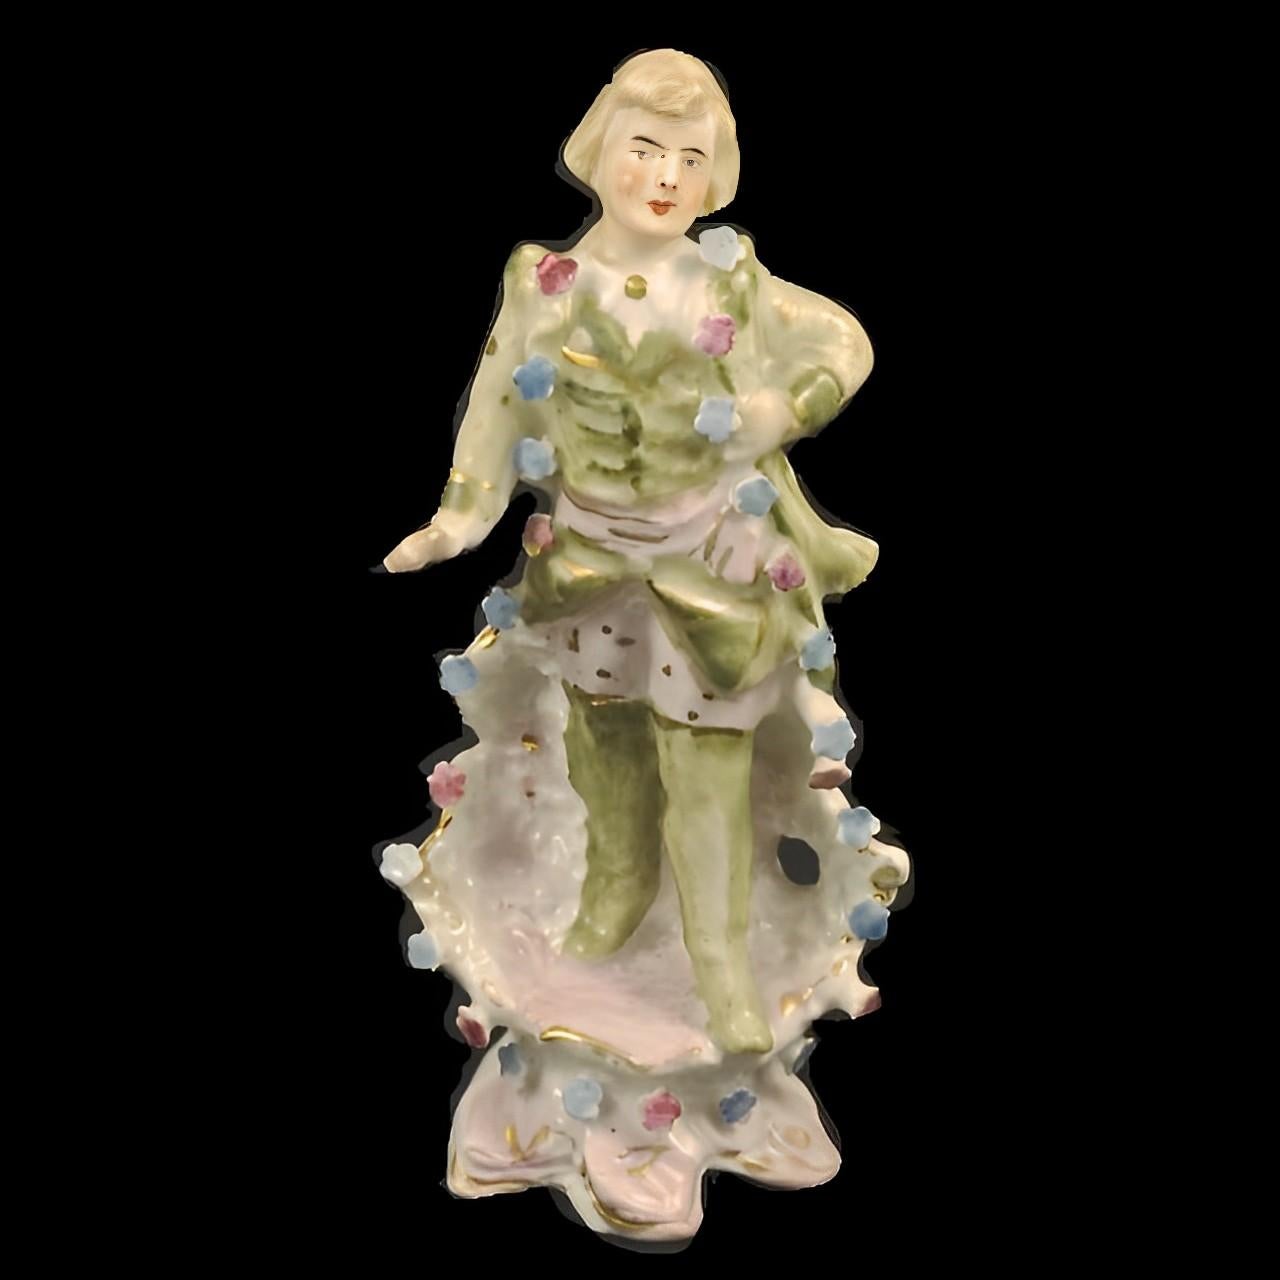 Antique Hand Painted Porcelain Man Figurine with Flowers For Sale 2